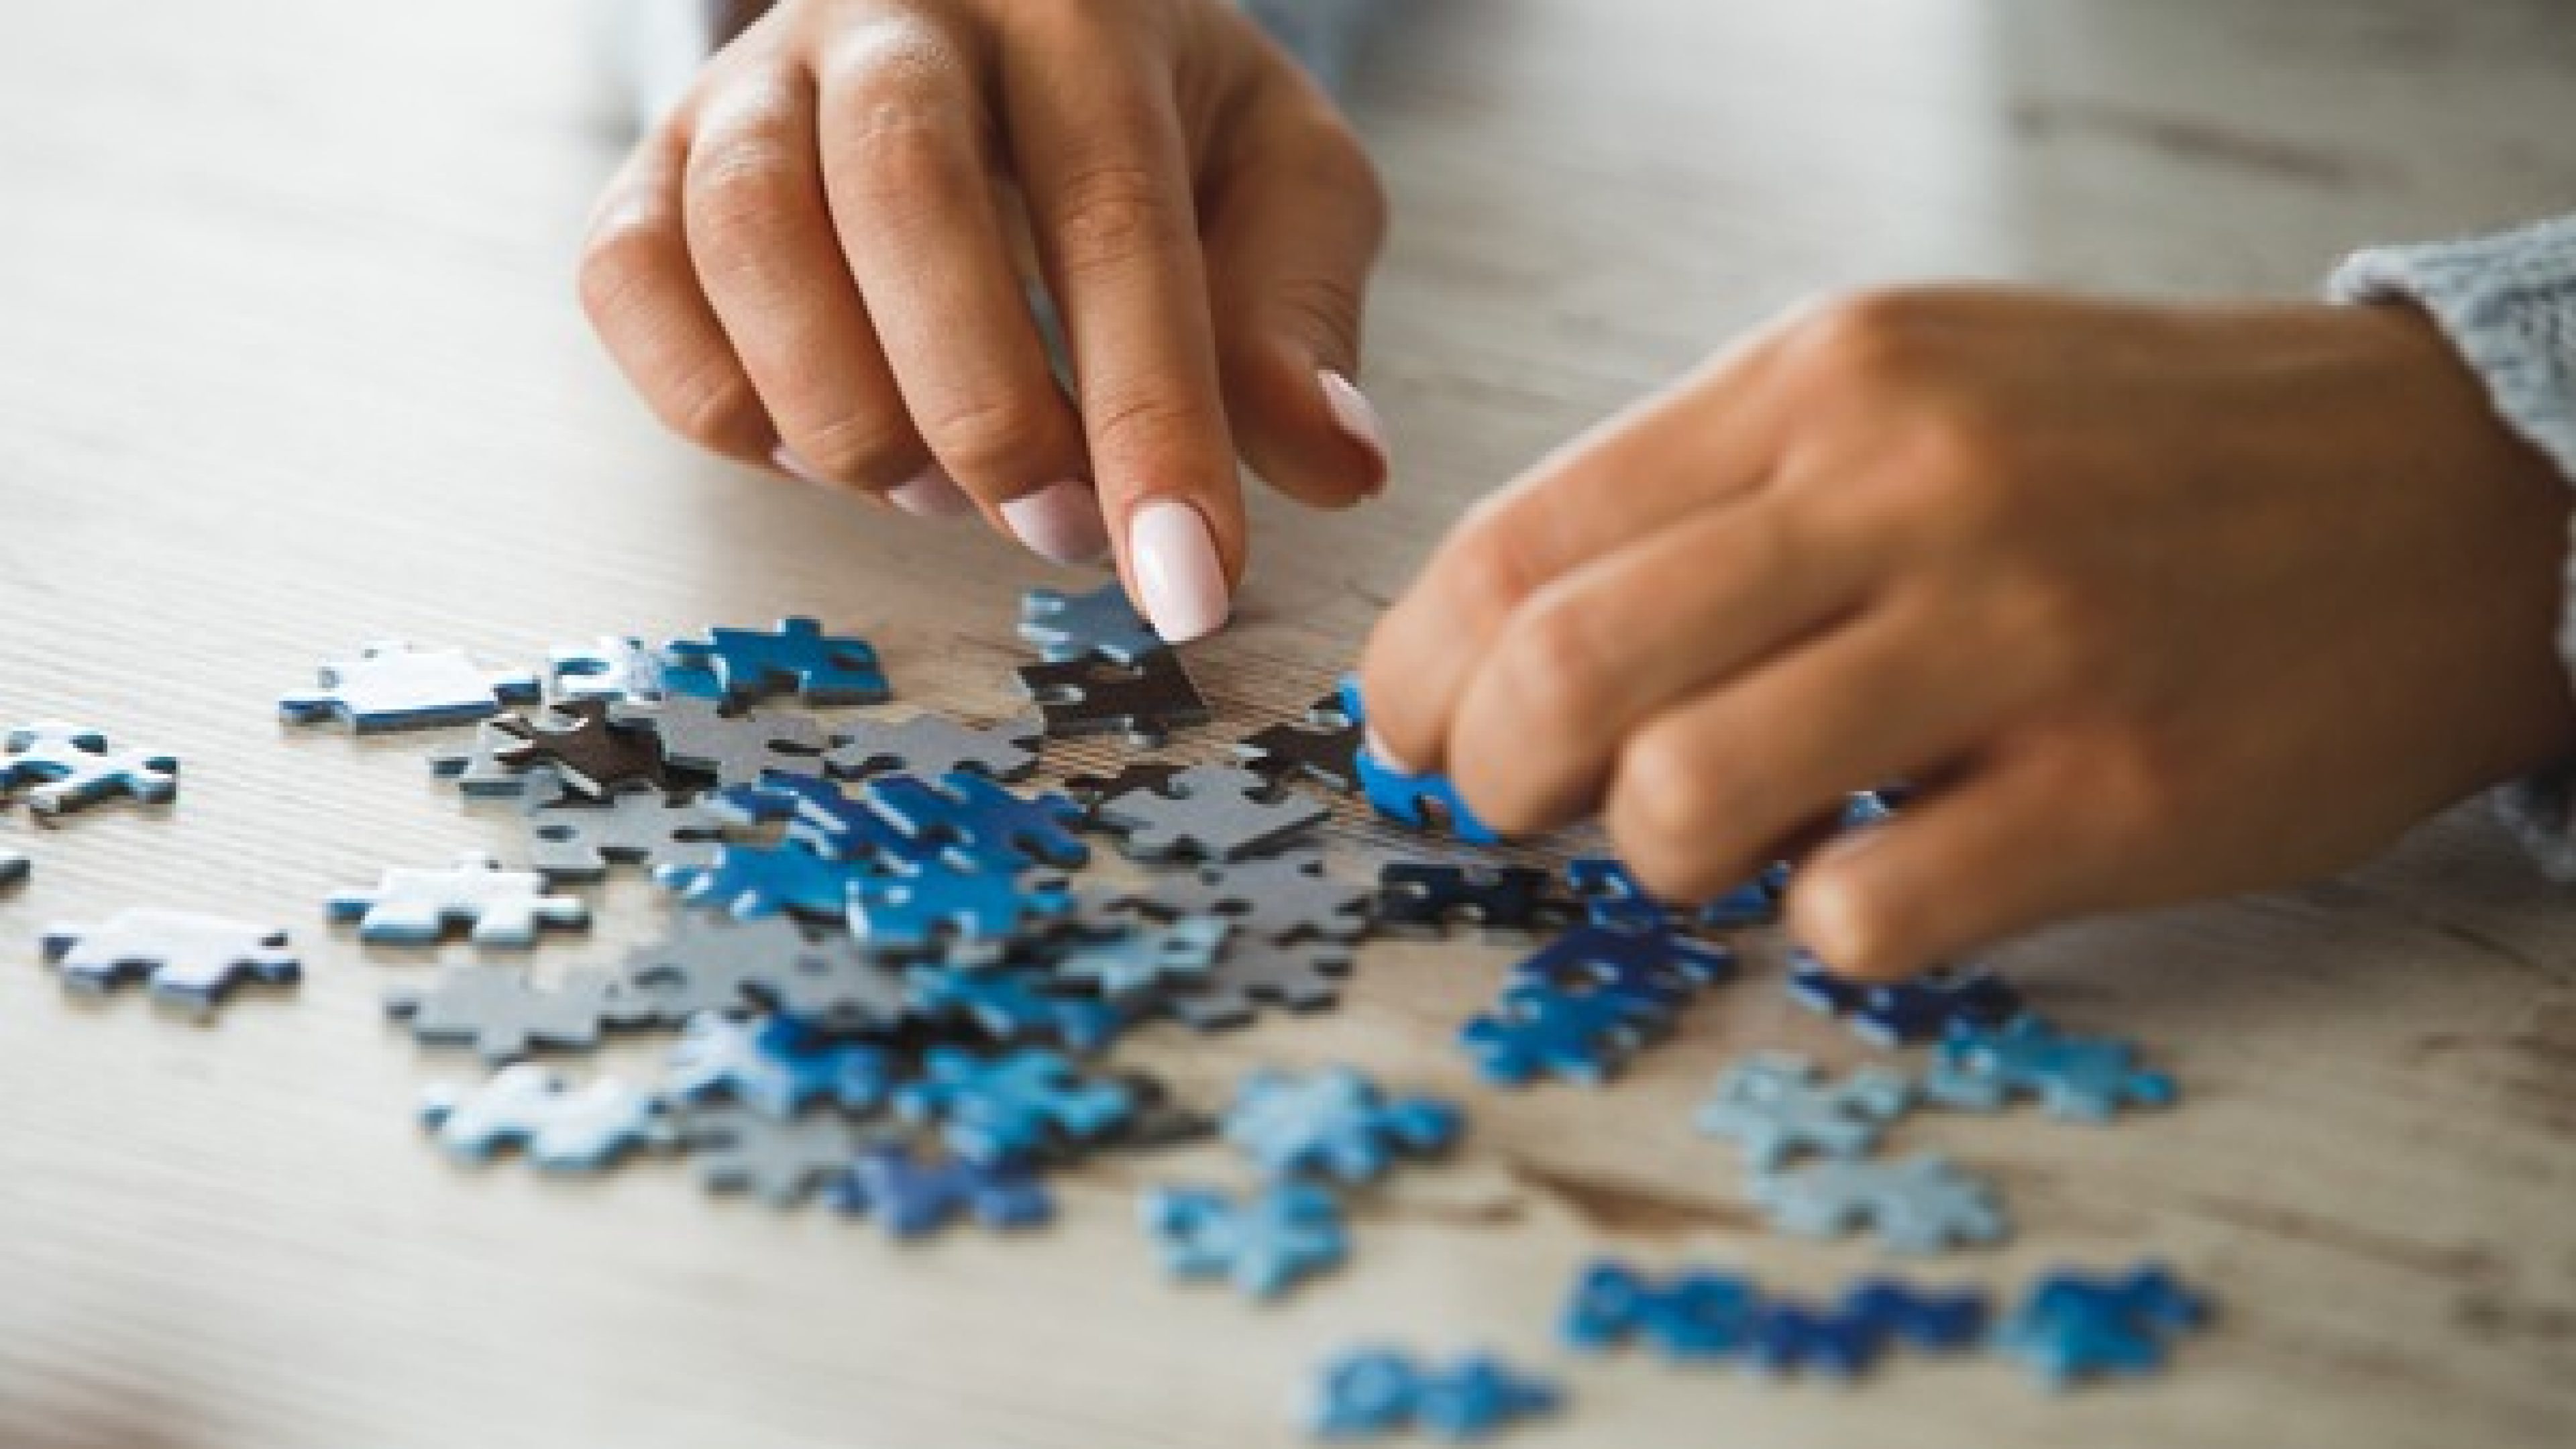 Close up of female hands playing with puzzle pieces on wooden table to spend free time in a healthy entertaining way.